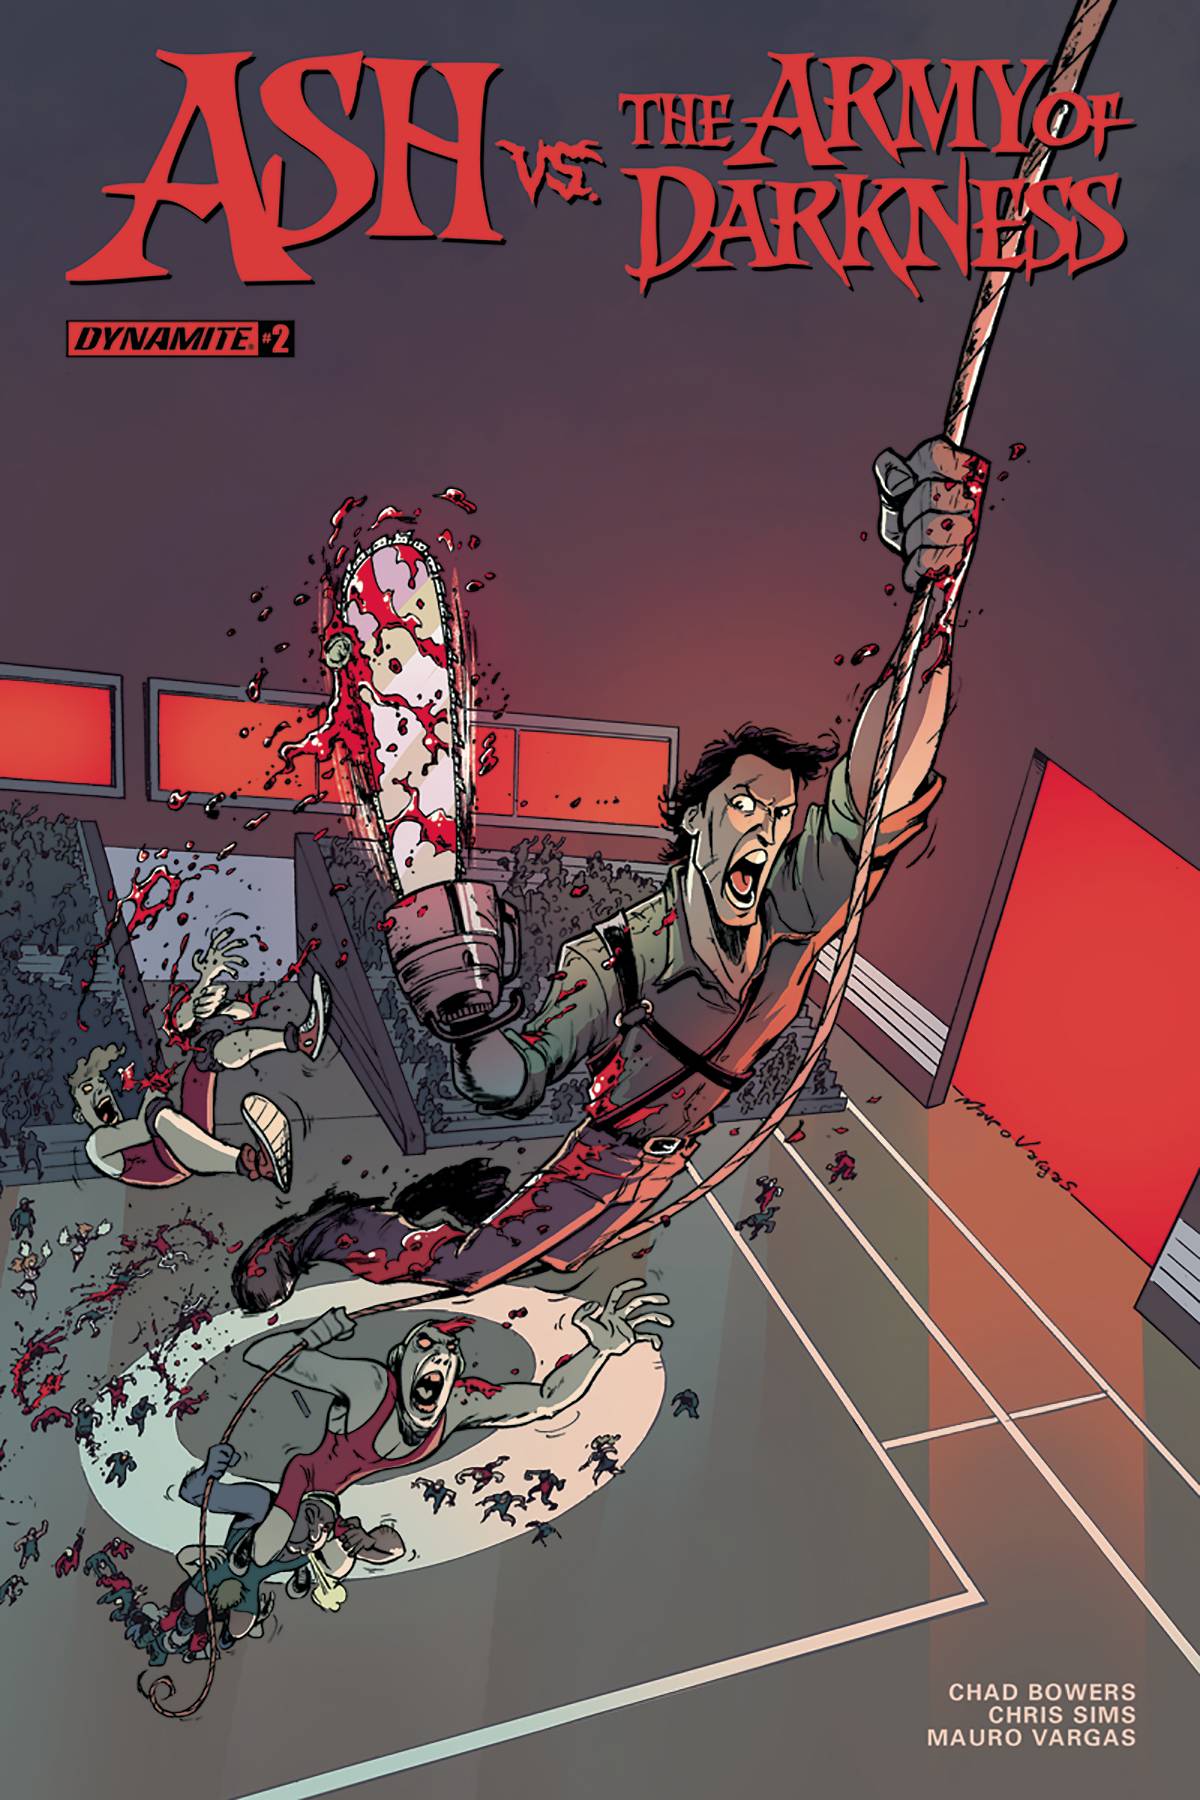 ASH VS. THE ARMY OF DARKNESS#2